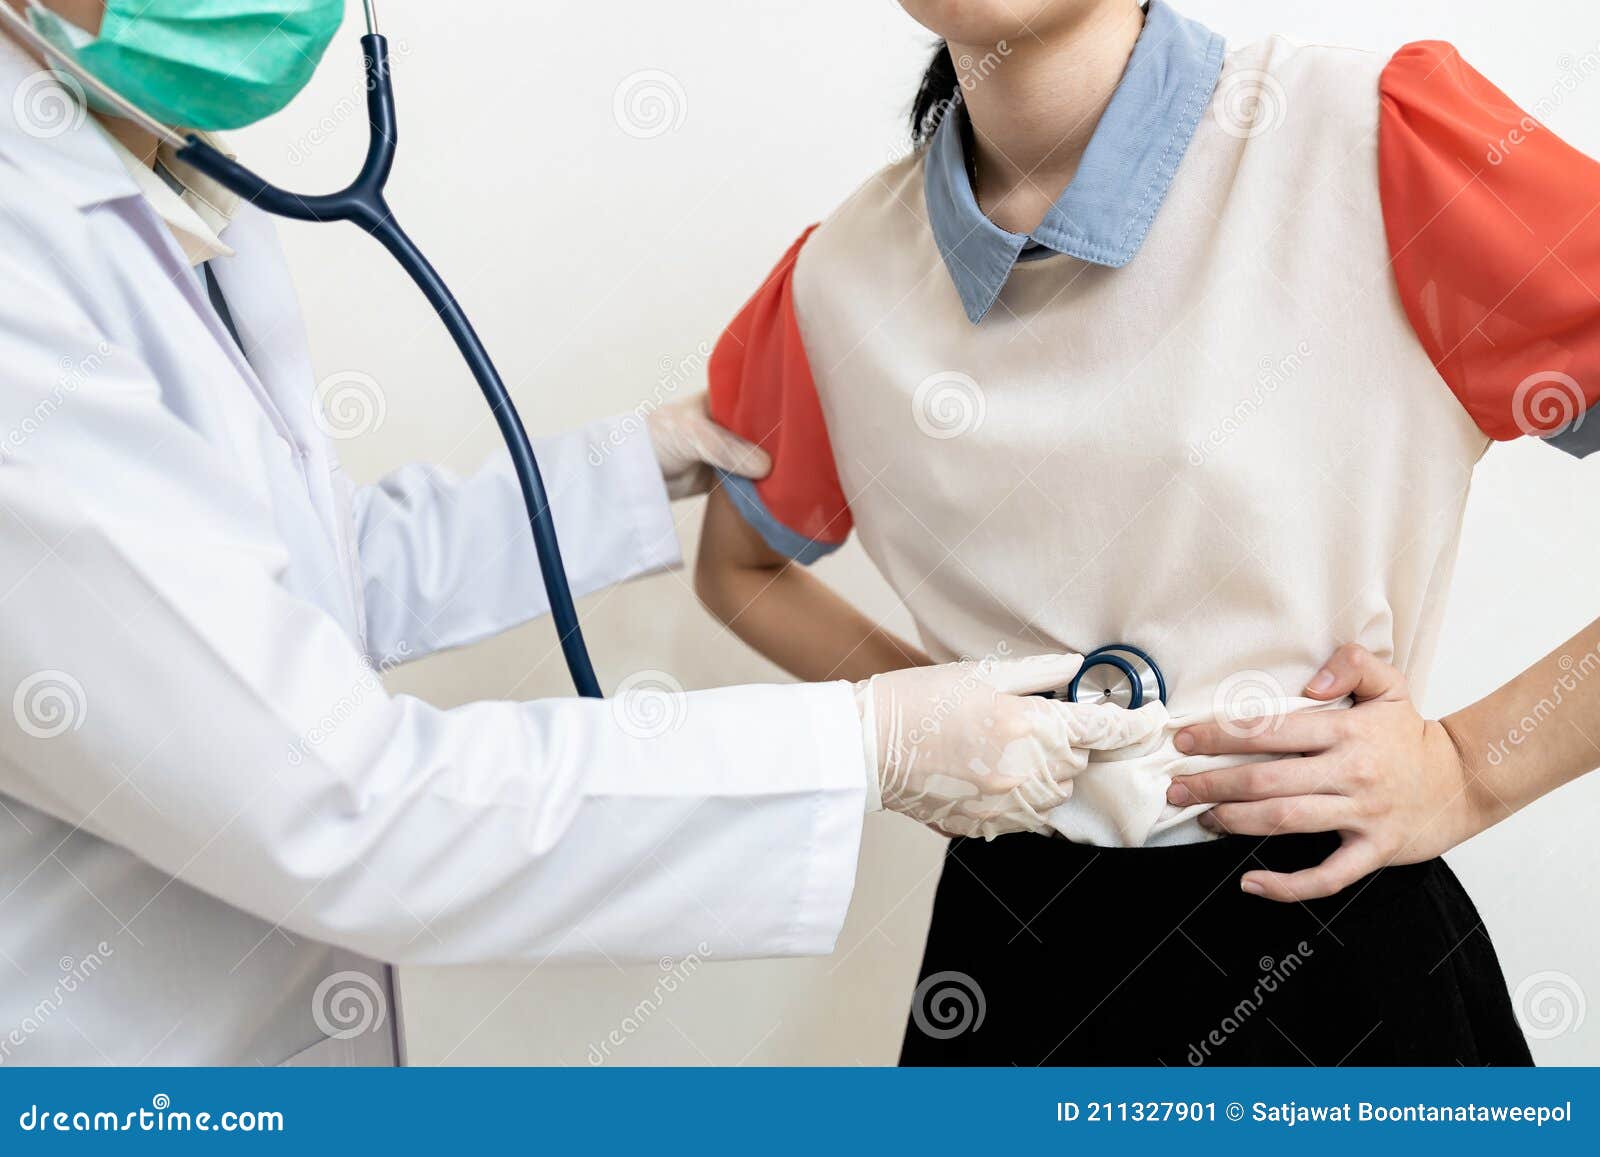 asian child girl with flatulence,bloated stomach checking the abdomen,physical examination,doctor using a stethoscope,listen to